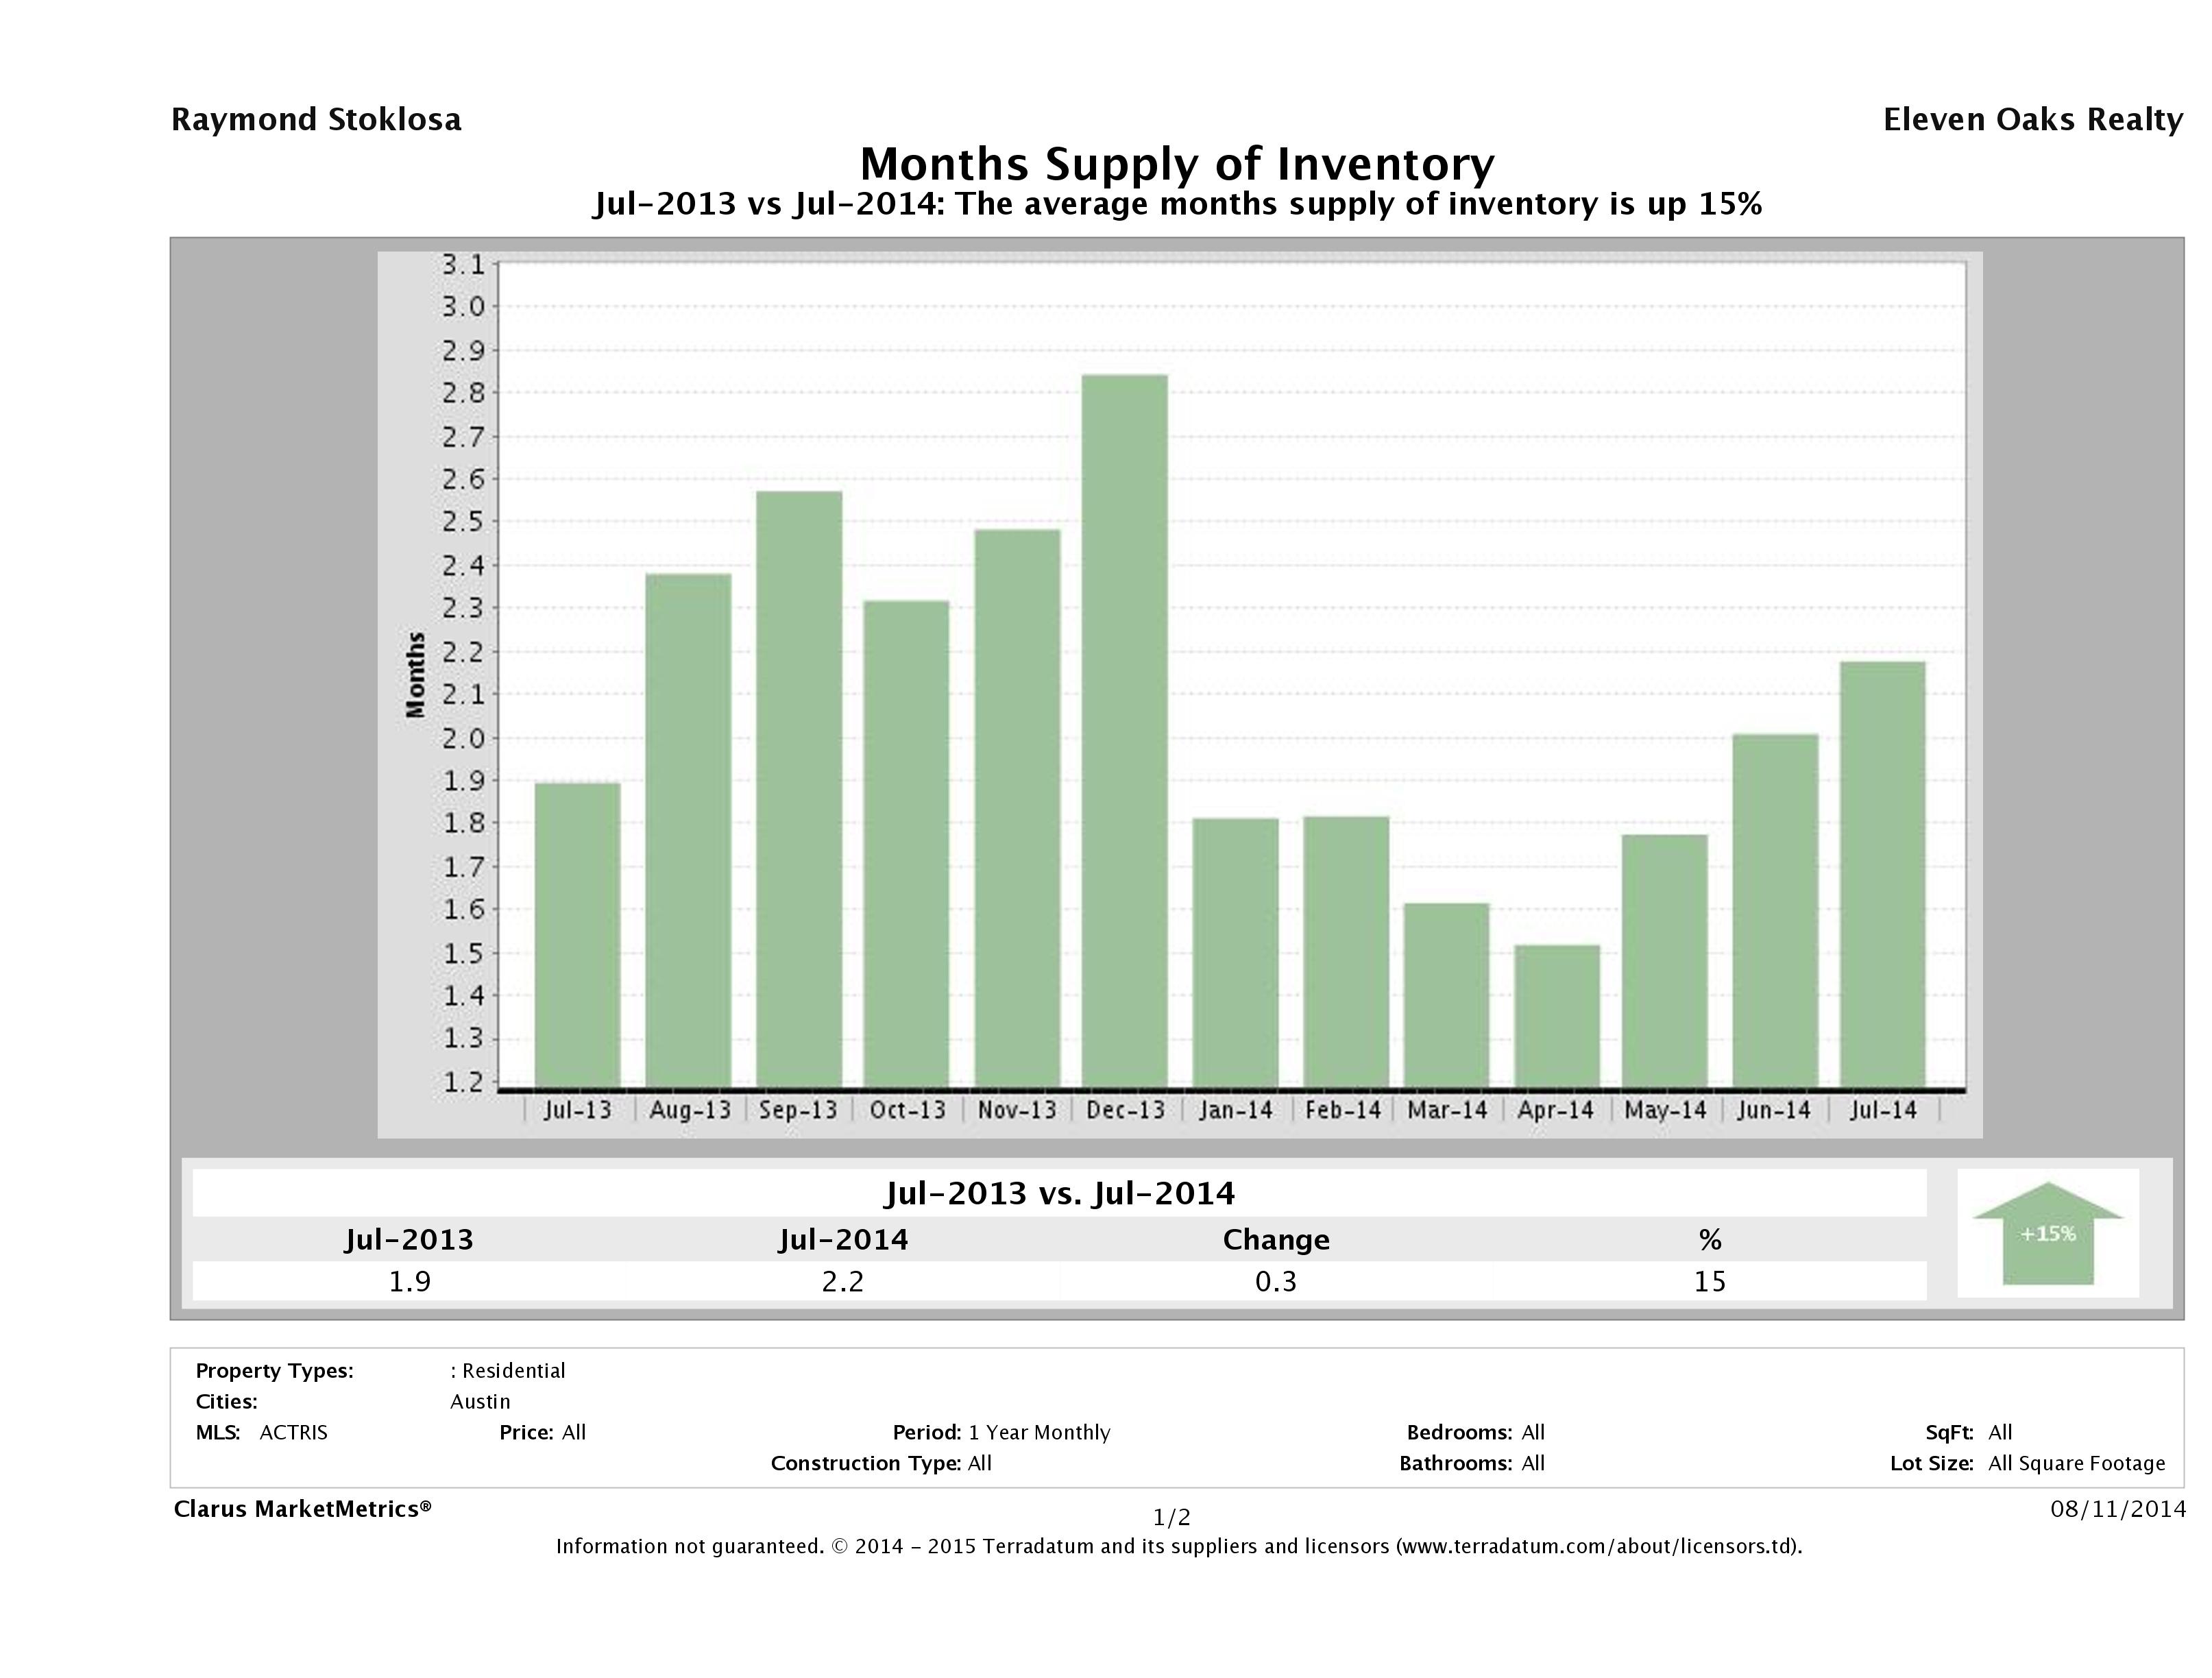 Austin single family home months inventory July 2014